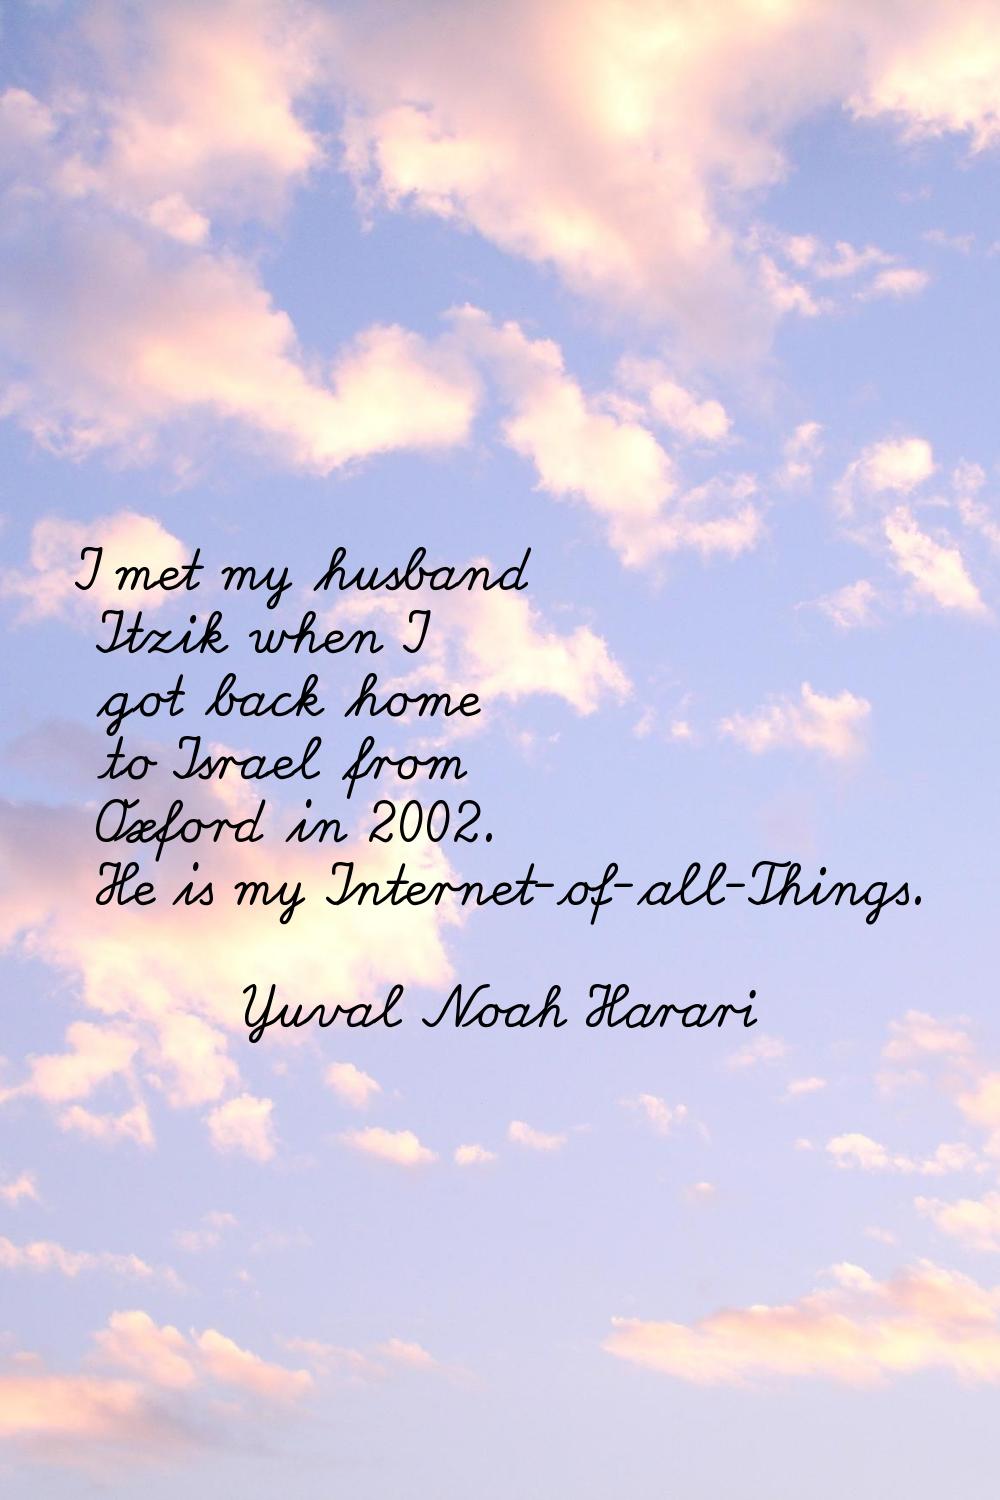 I met my husband Itzik when I got back home to Israel from Oxford in 2002. He is my Internet-of-all